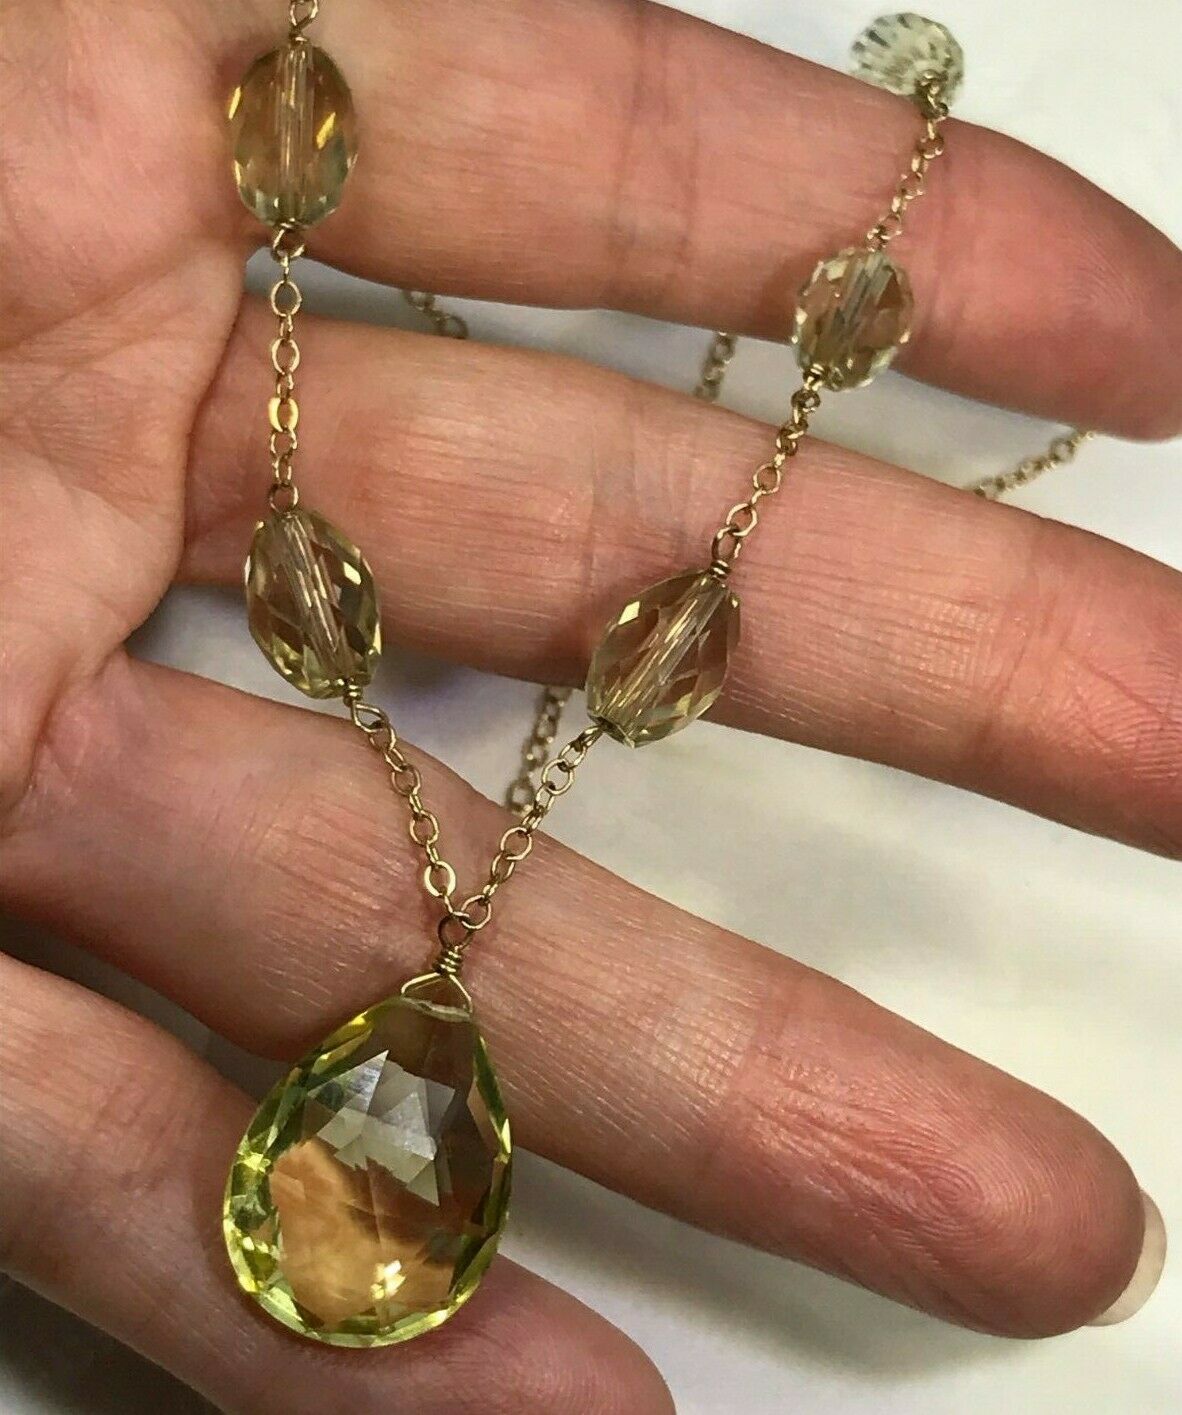 14k Yellow Gold Lemon Citrine Briolette By-the-Yard Necklace. 9g